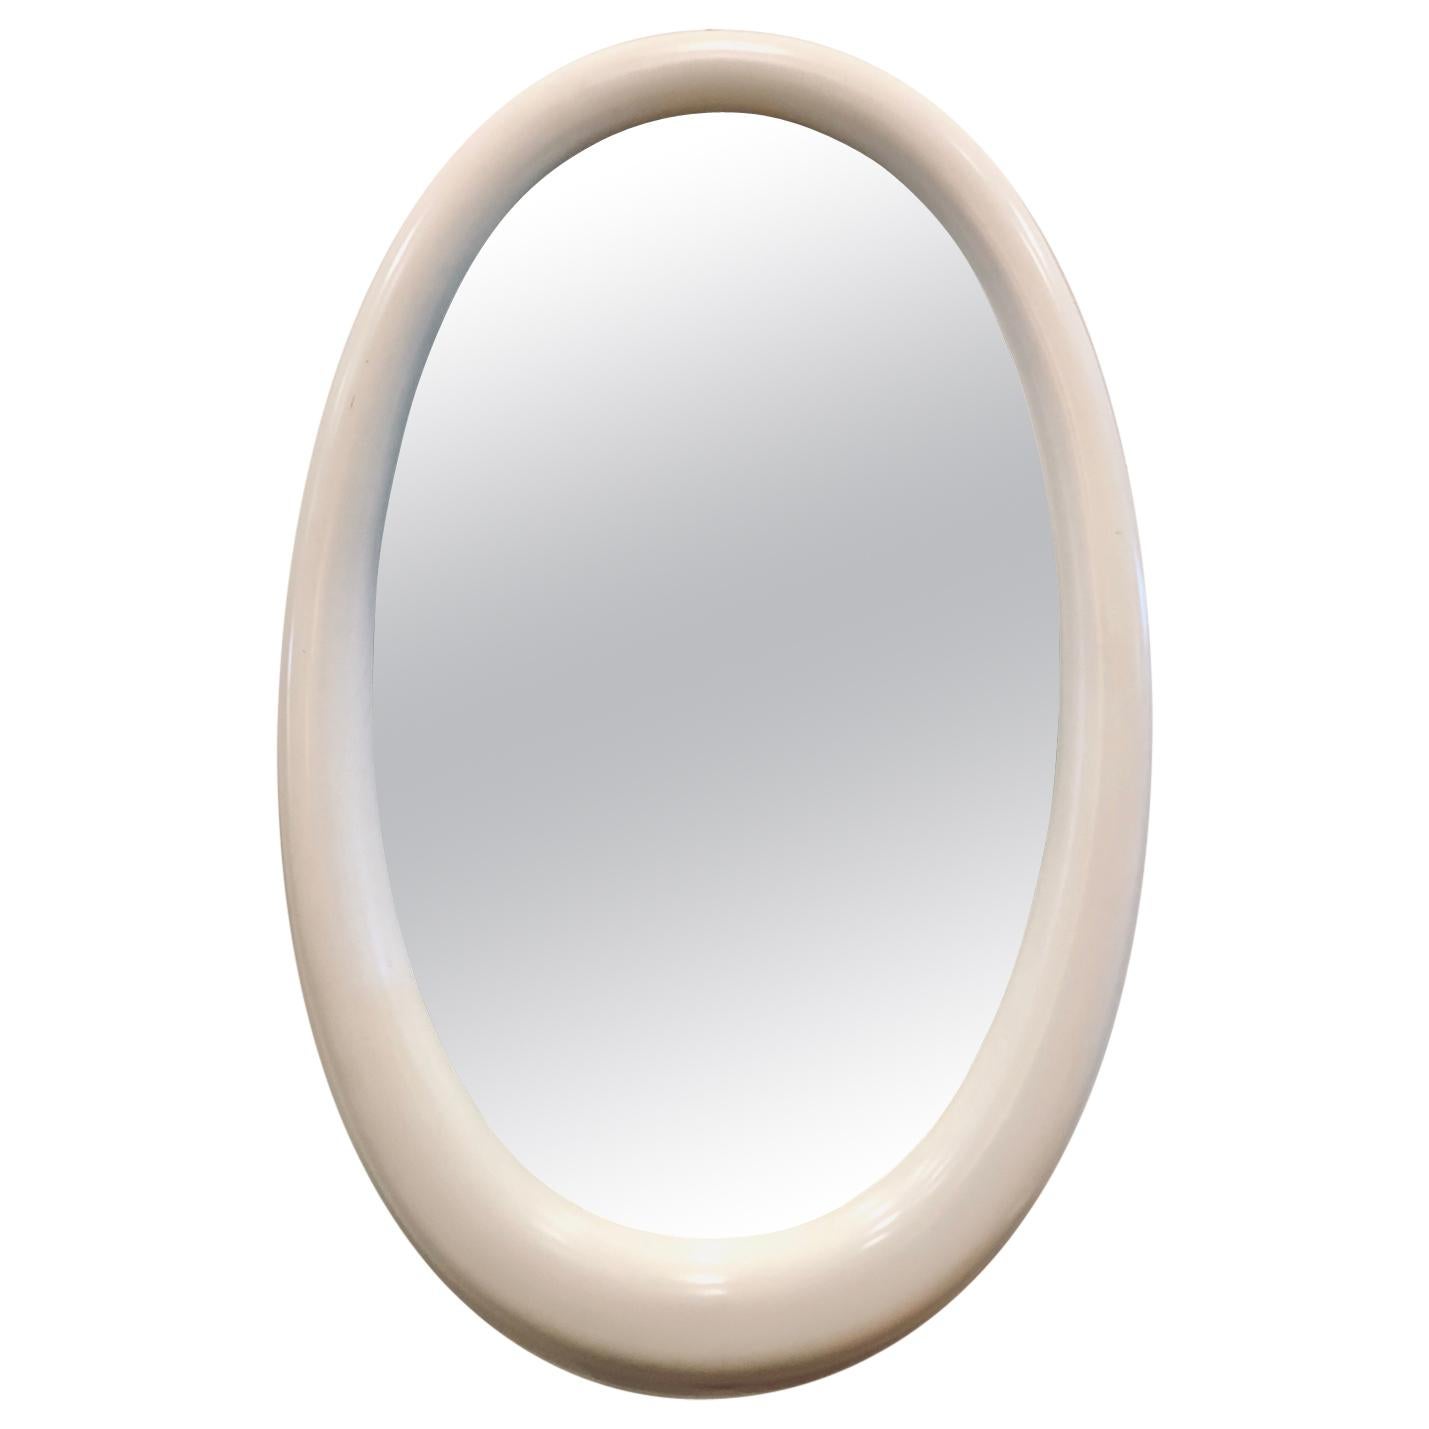 1970s Wood White Lacquer Oval Mirror